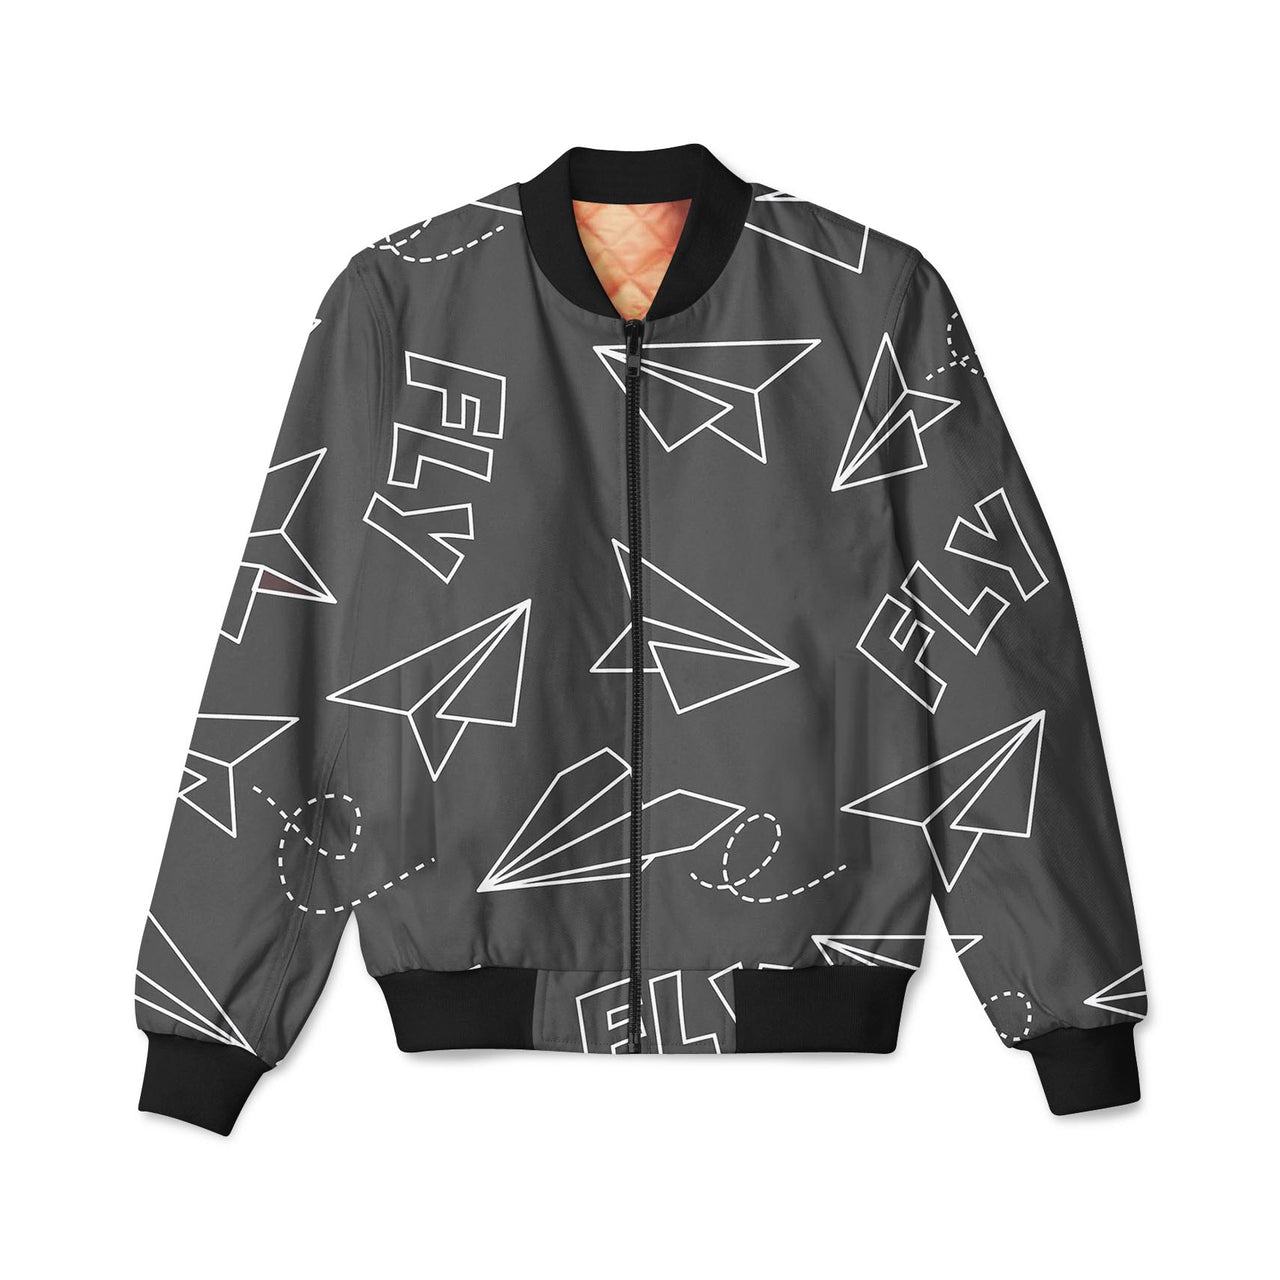 Paper Airplane & Fly (Gray) Designed 3D Pilot Bomber Jackets